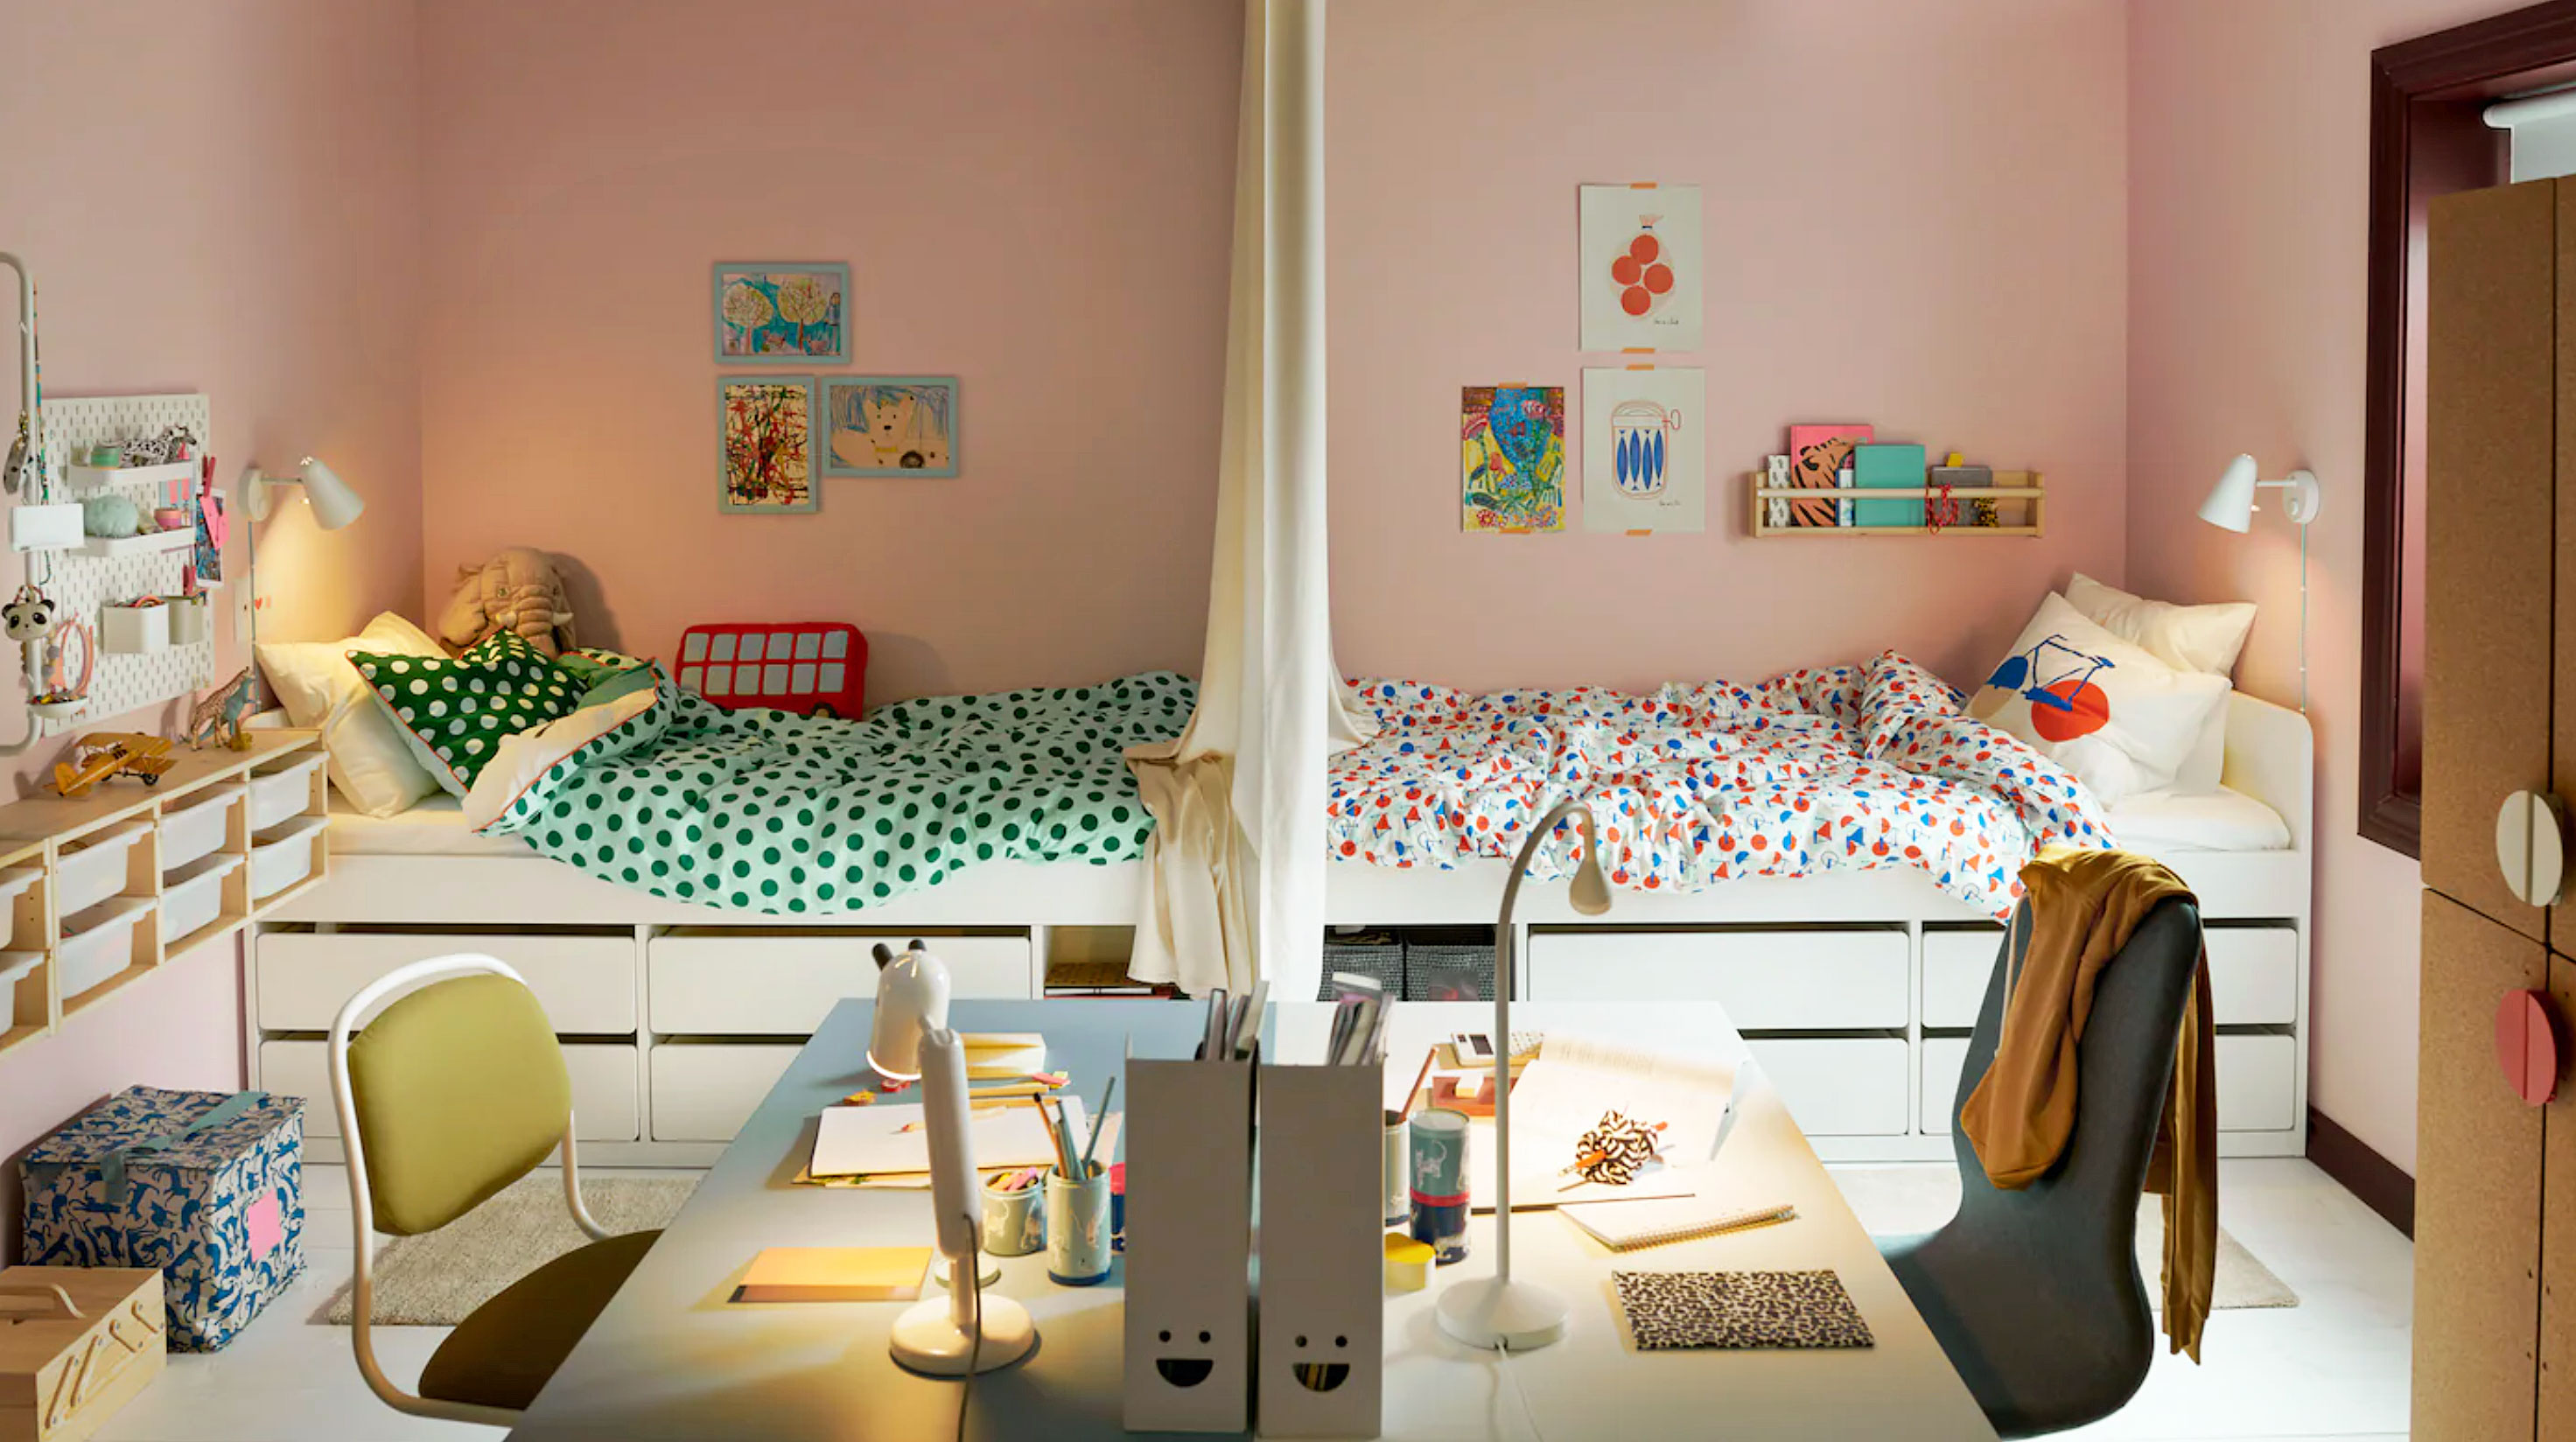 Shared bedroom ideas How to divide a shared kids' room   Homes ...